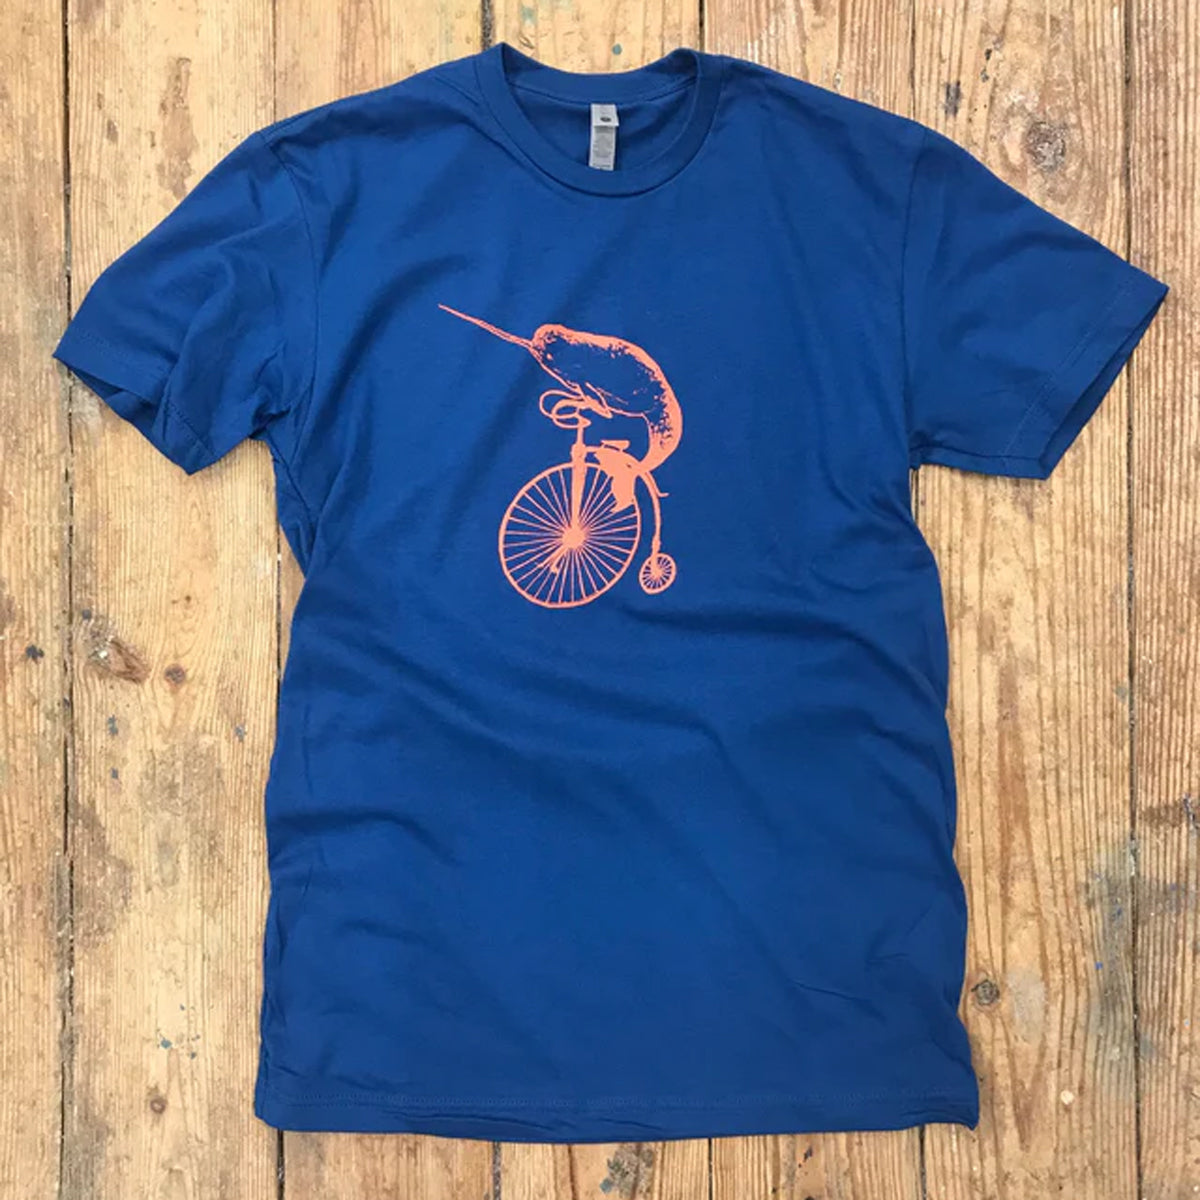 A blue t-shirt with the 'Narwhal on a Penny-farthing' design on the front with orange ink.